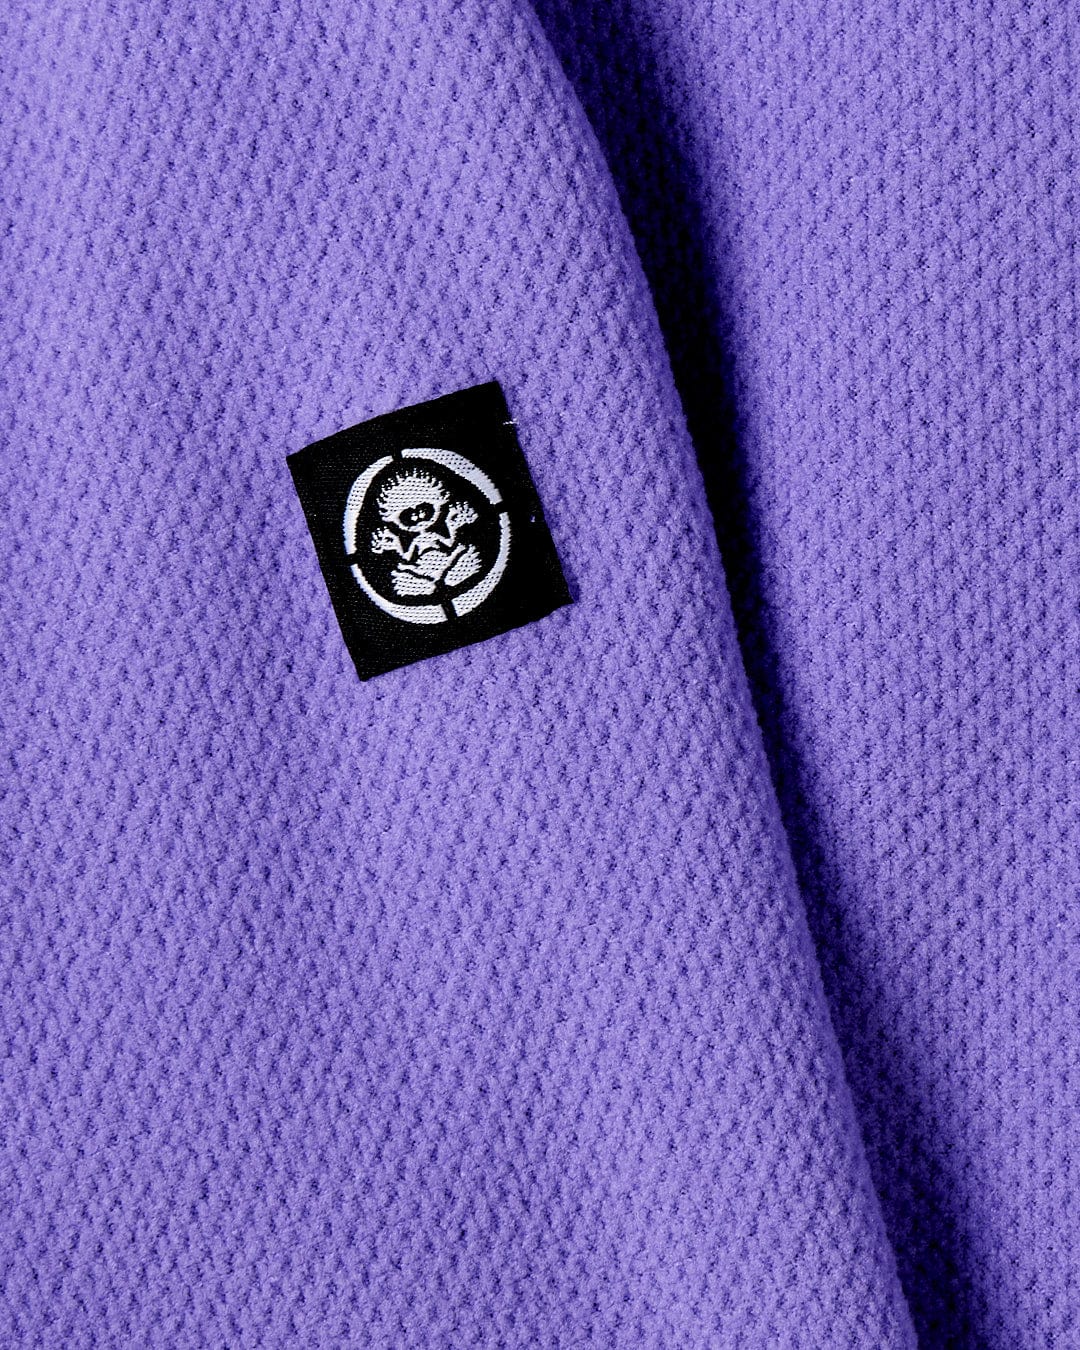 A close up of a Saltrock Ella - Girls 1/4 Neck Fleece in purple with a skull logo on it made from recycled material.